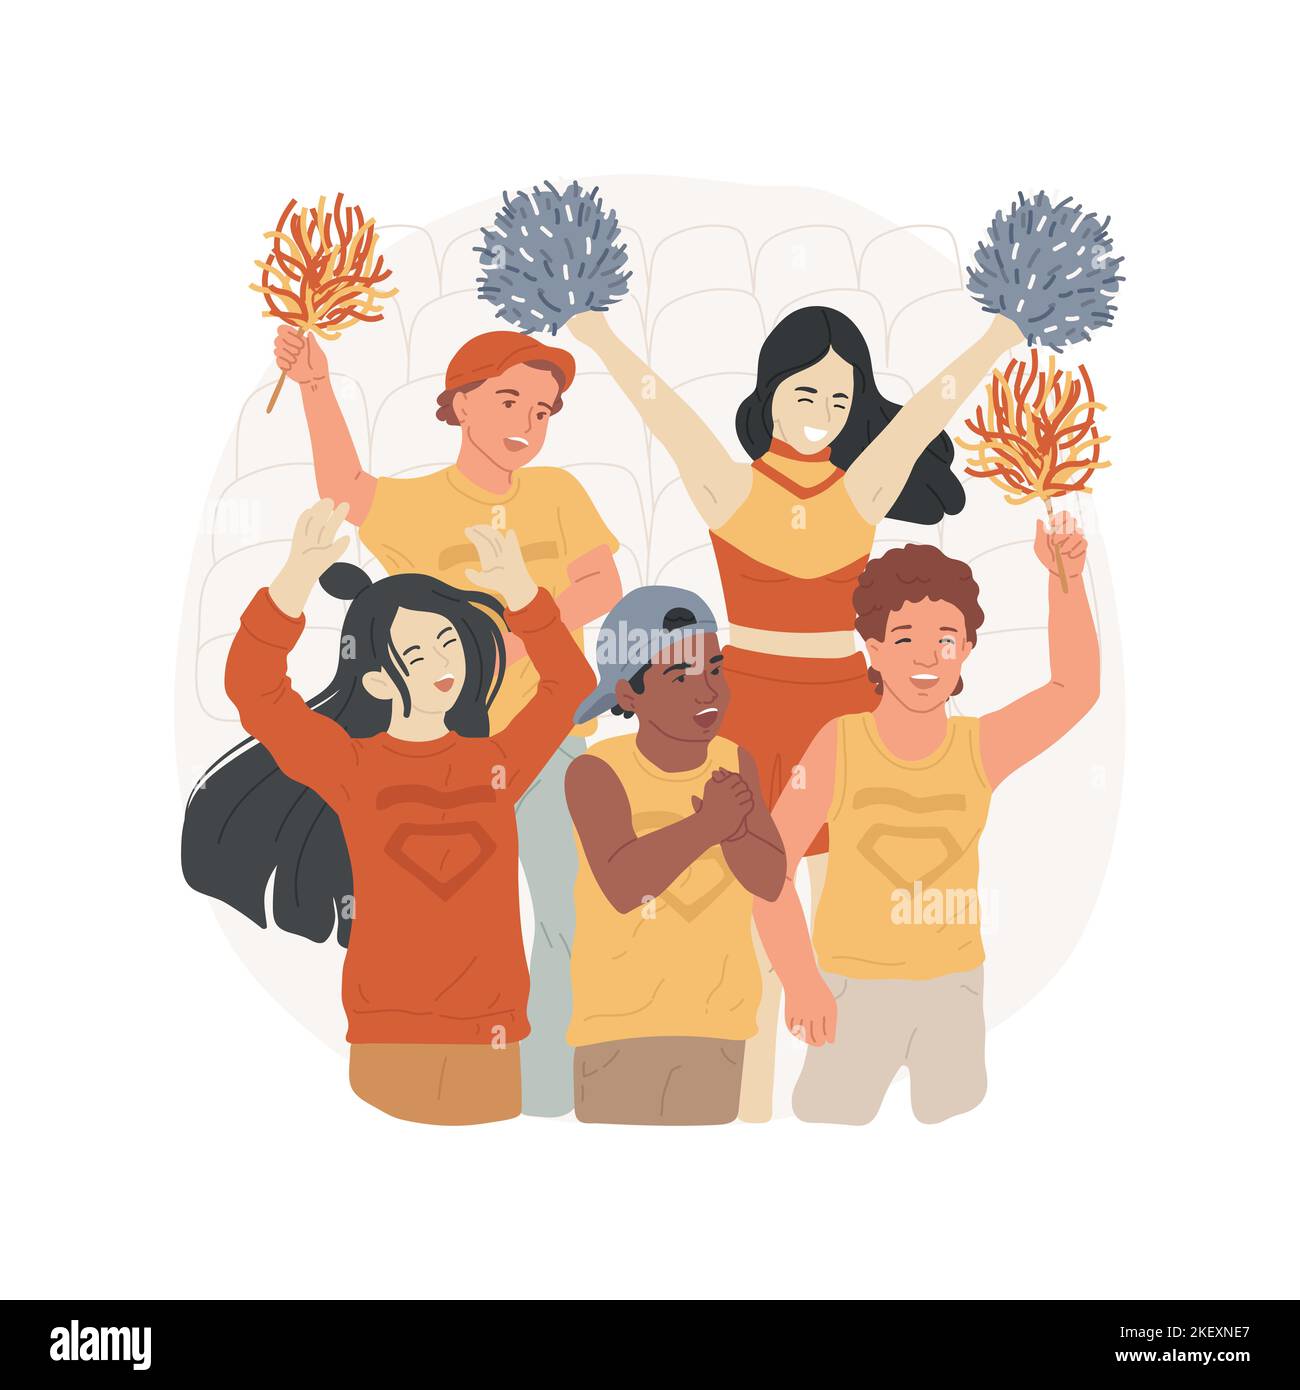 School team fans isolated cartoon vector illustration. School league, sports team, win championship, students watching game, happy crowd, socialization, high school tradition vector cartoon. Stock Vector